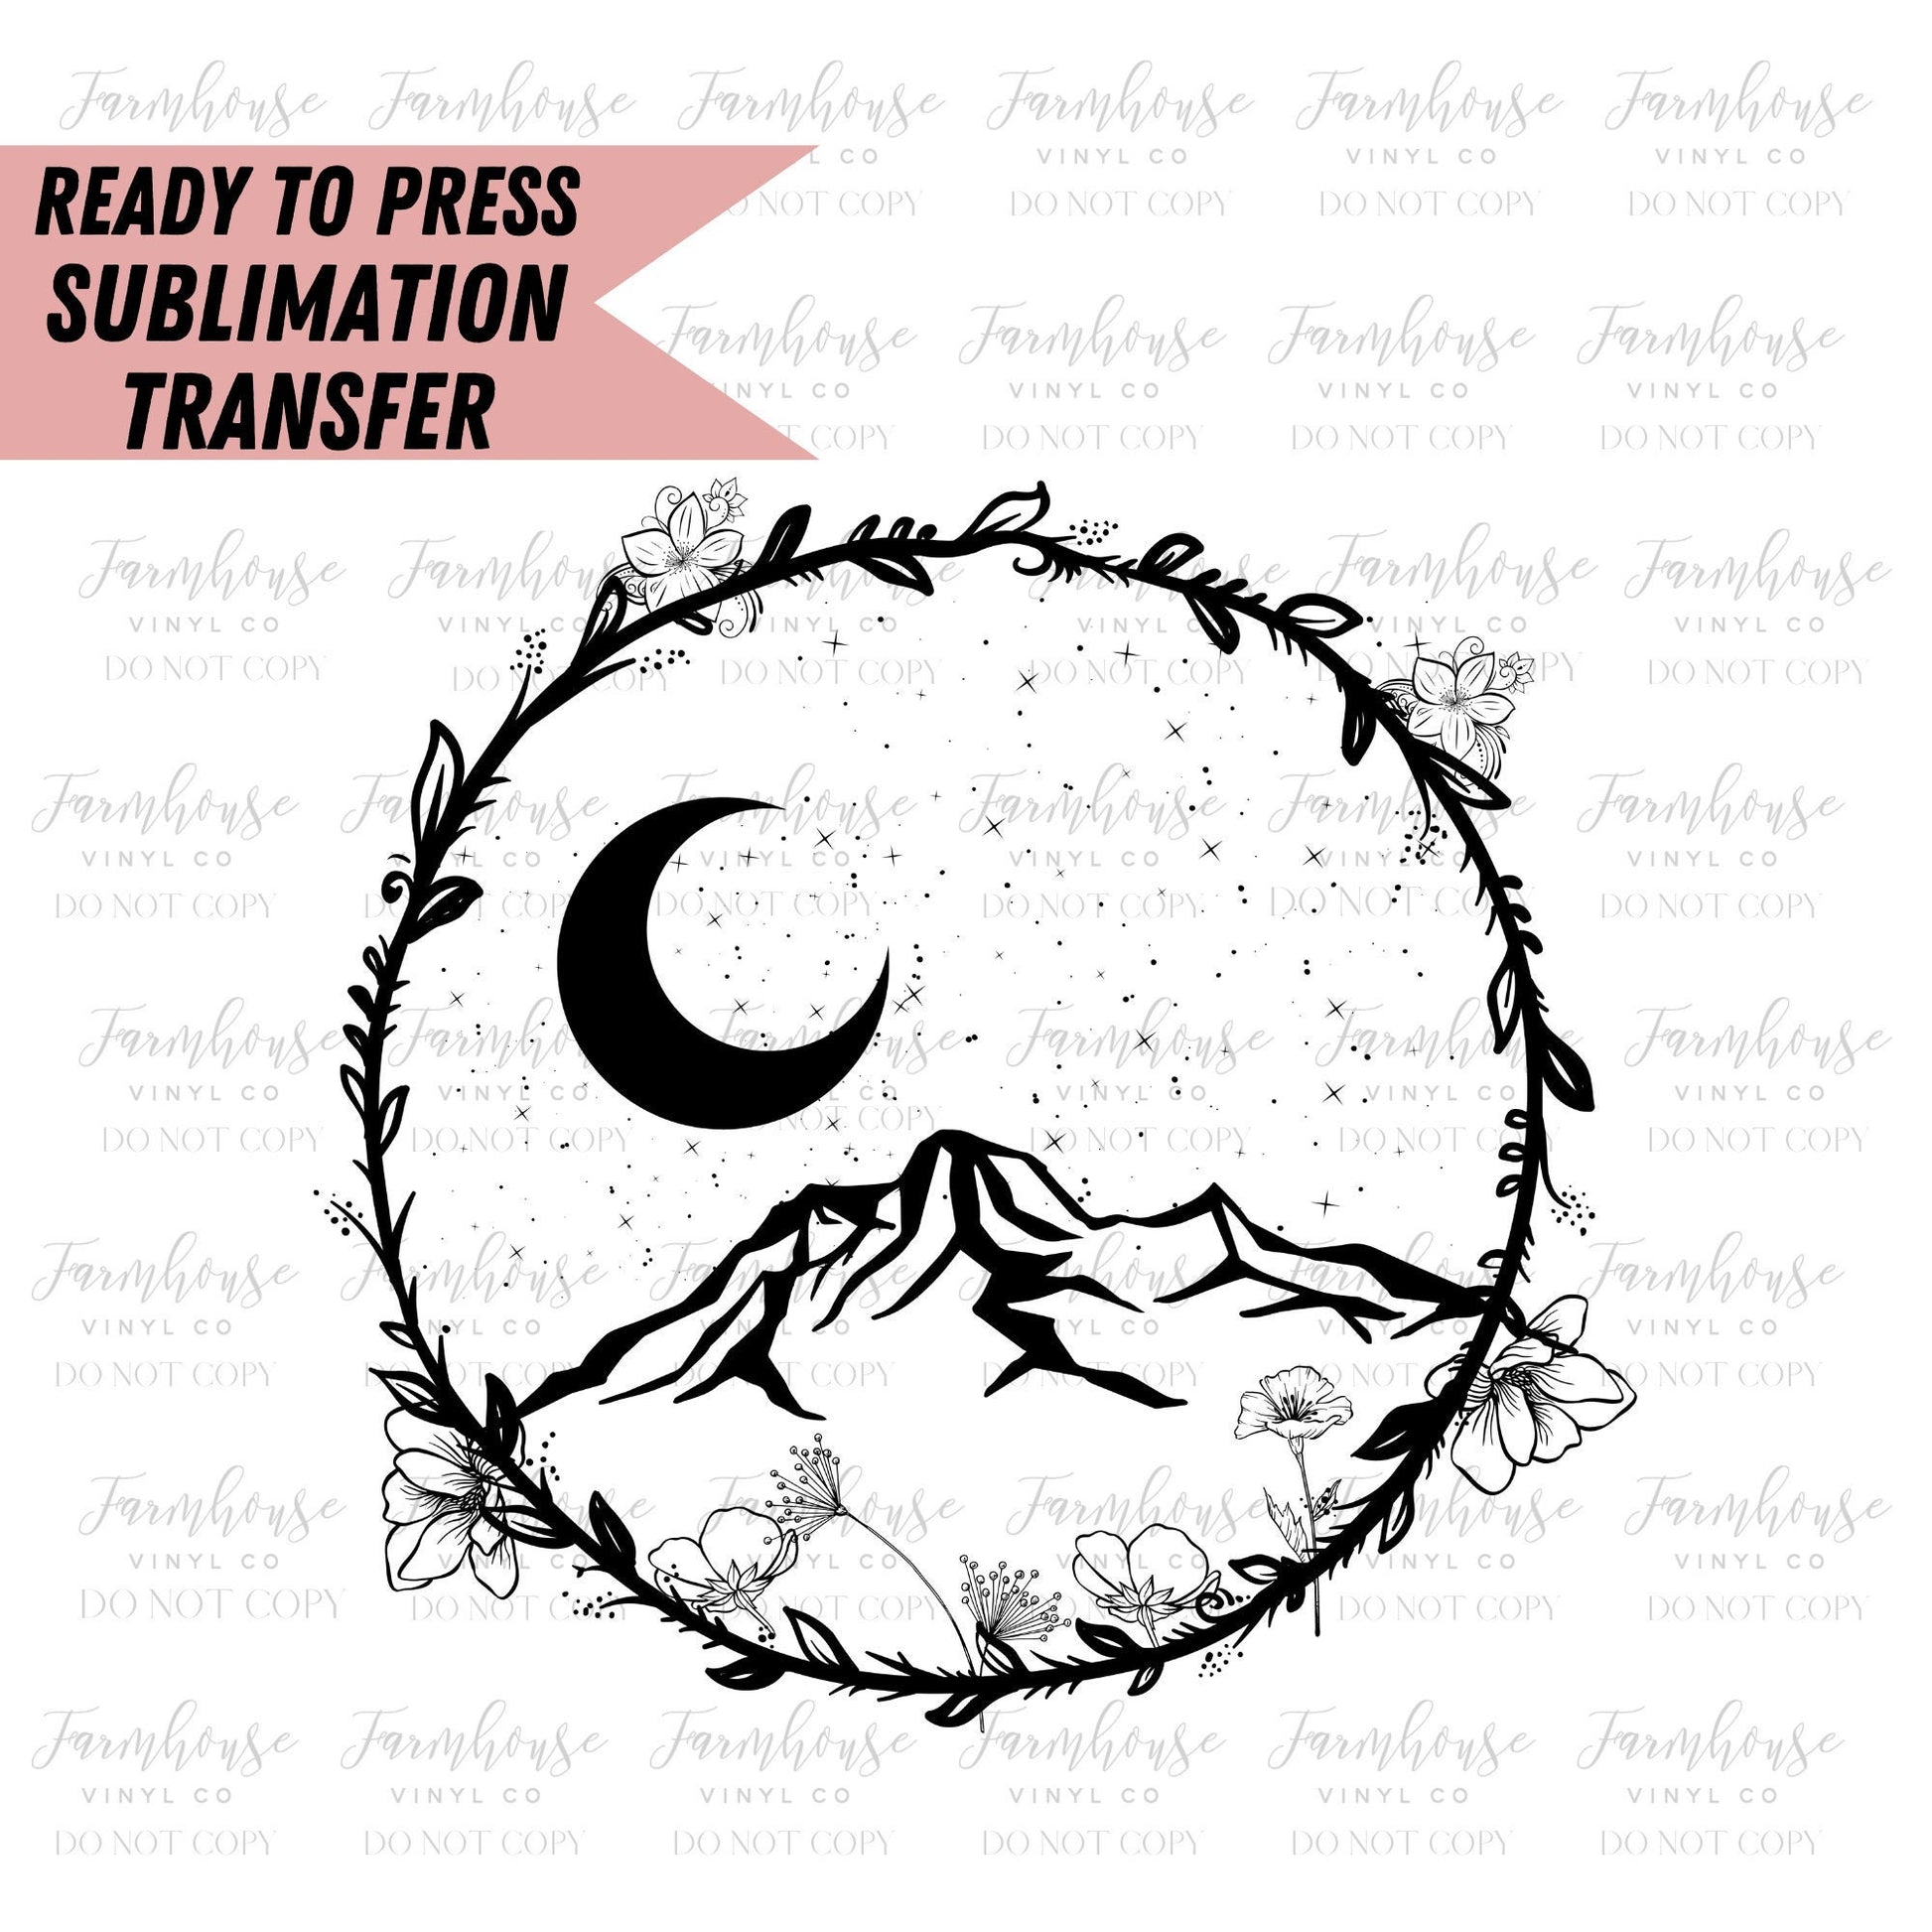 Mountains Moon Outdoor Camping, Ready to Press Sublimation Transfer, Sublimation Transfers, Heat Transfer, Ready to Press - Farmhouse Vinyl Co